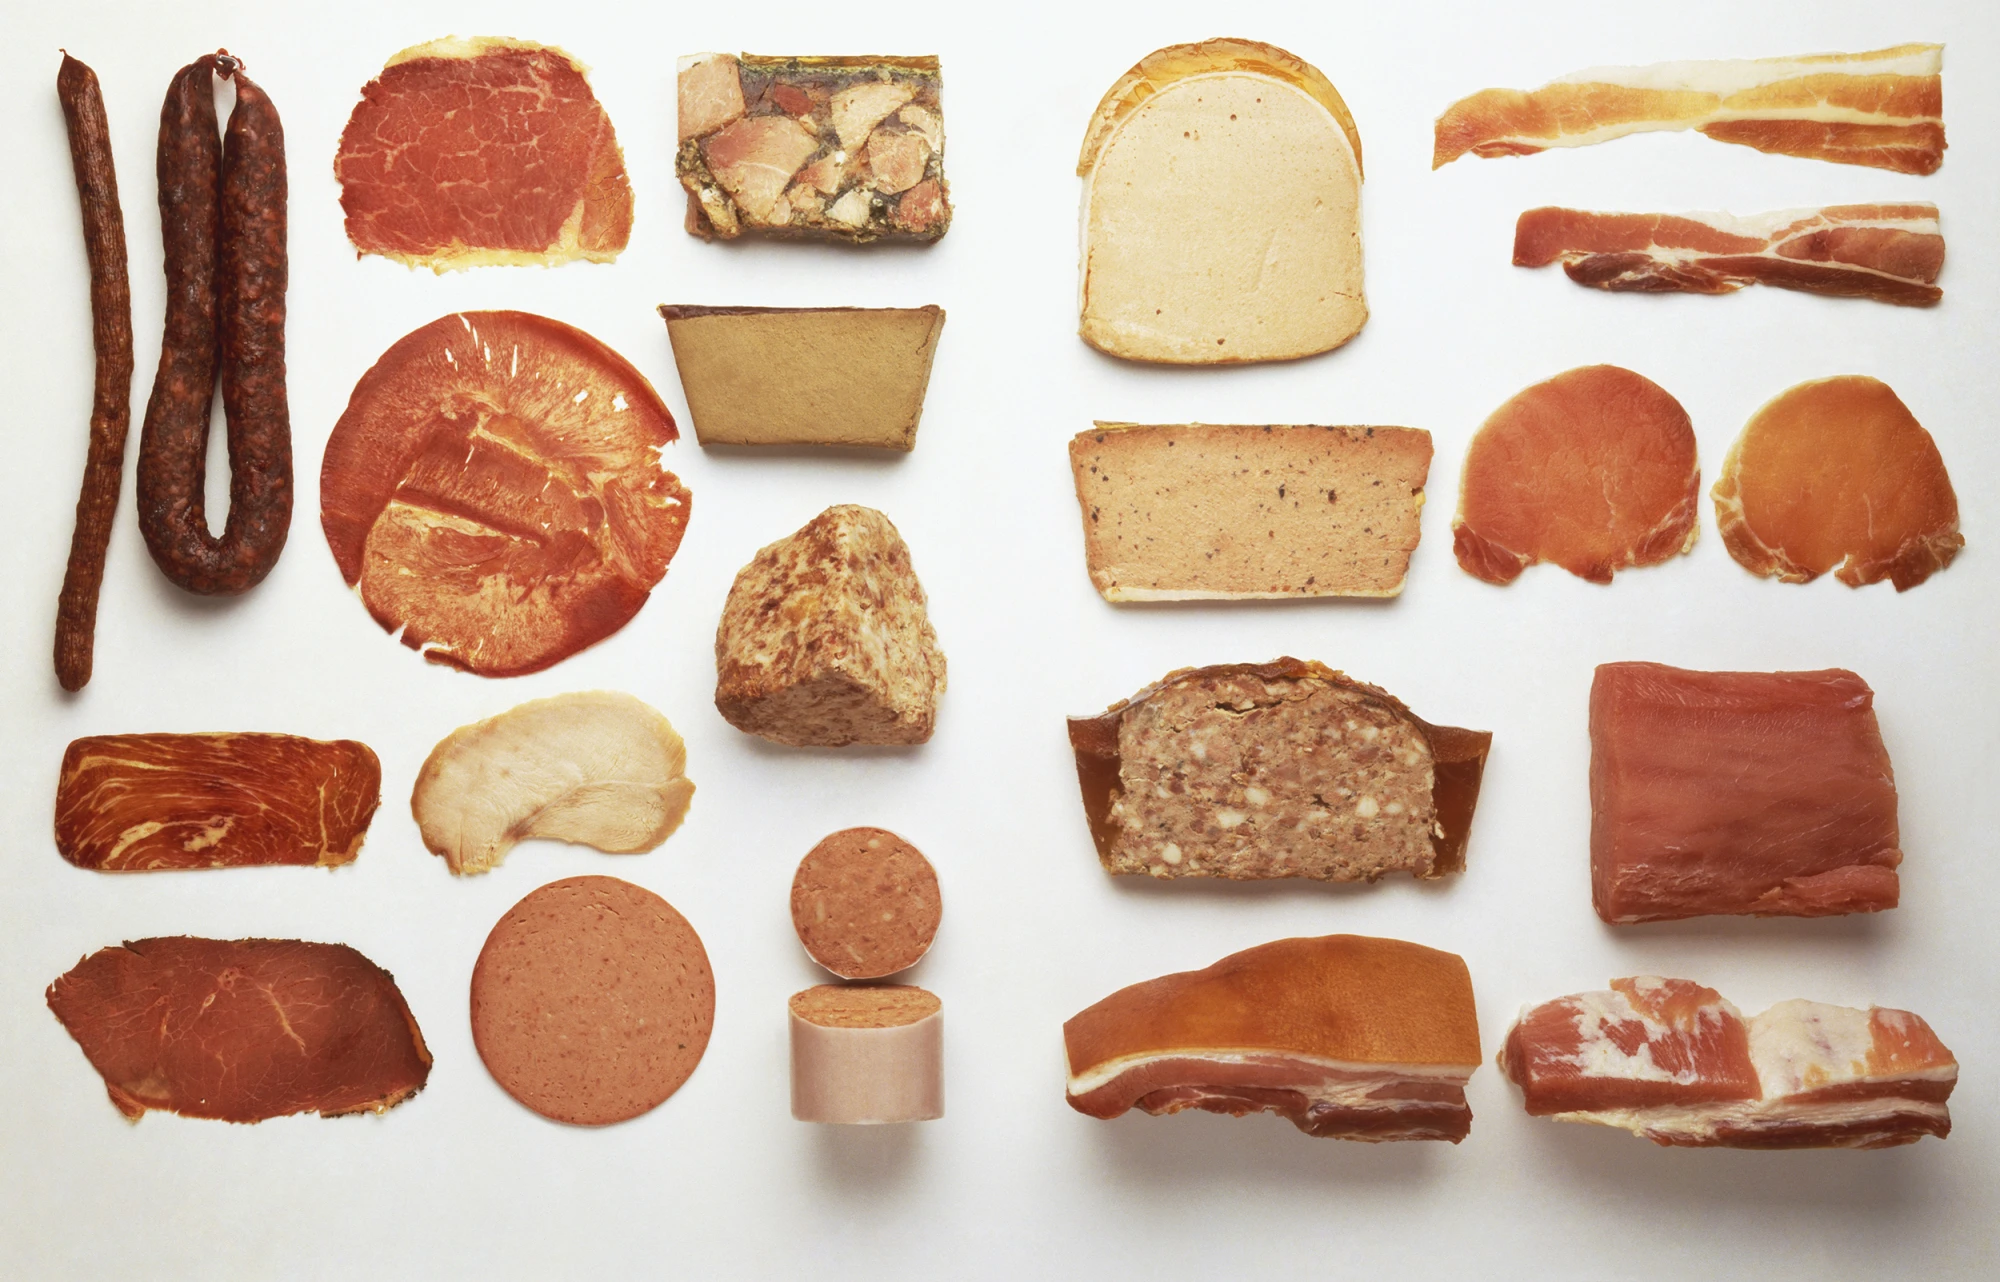 Why Is Processed Meat Bad For You?